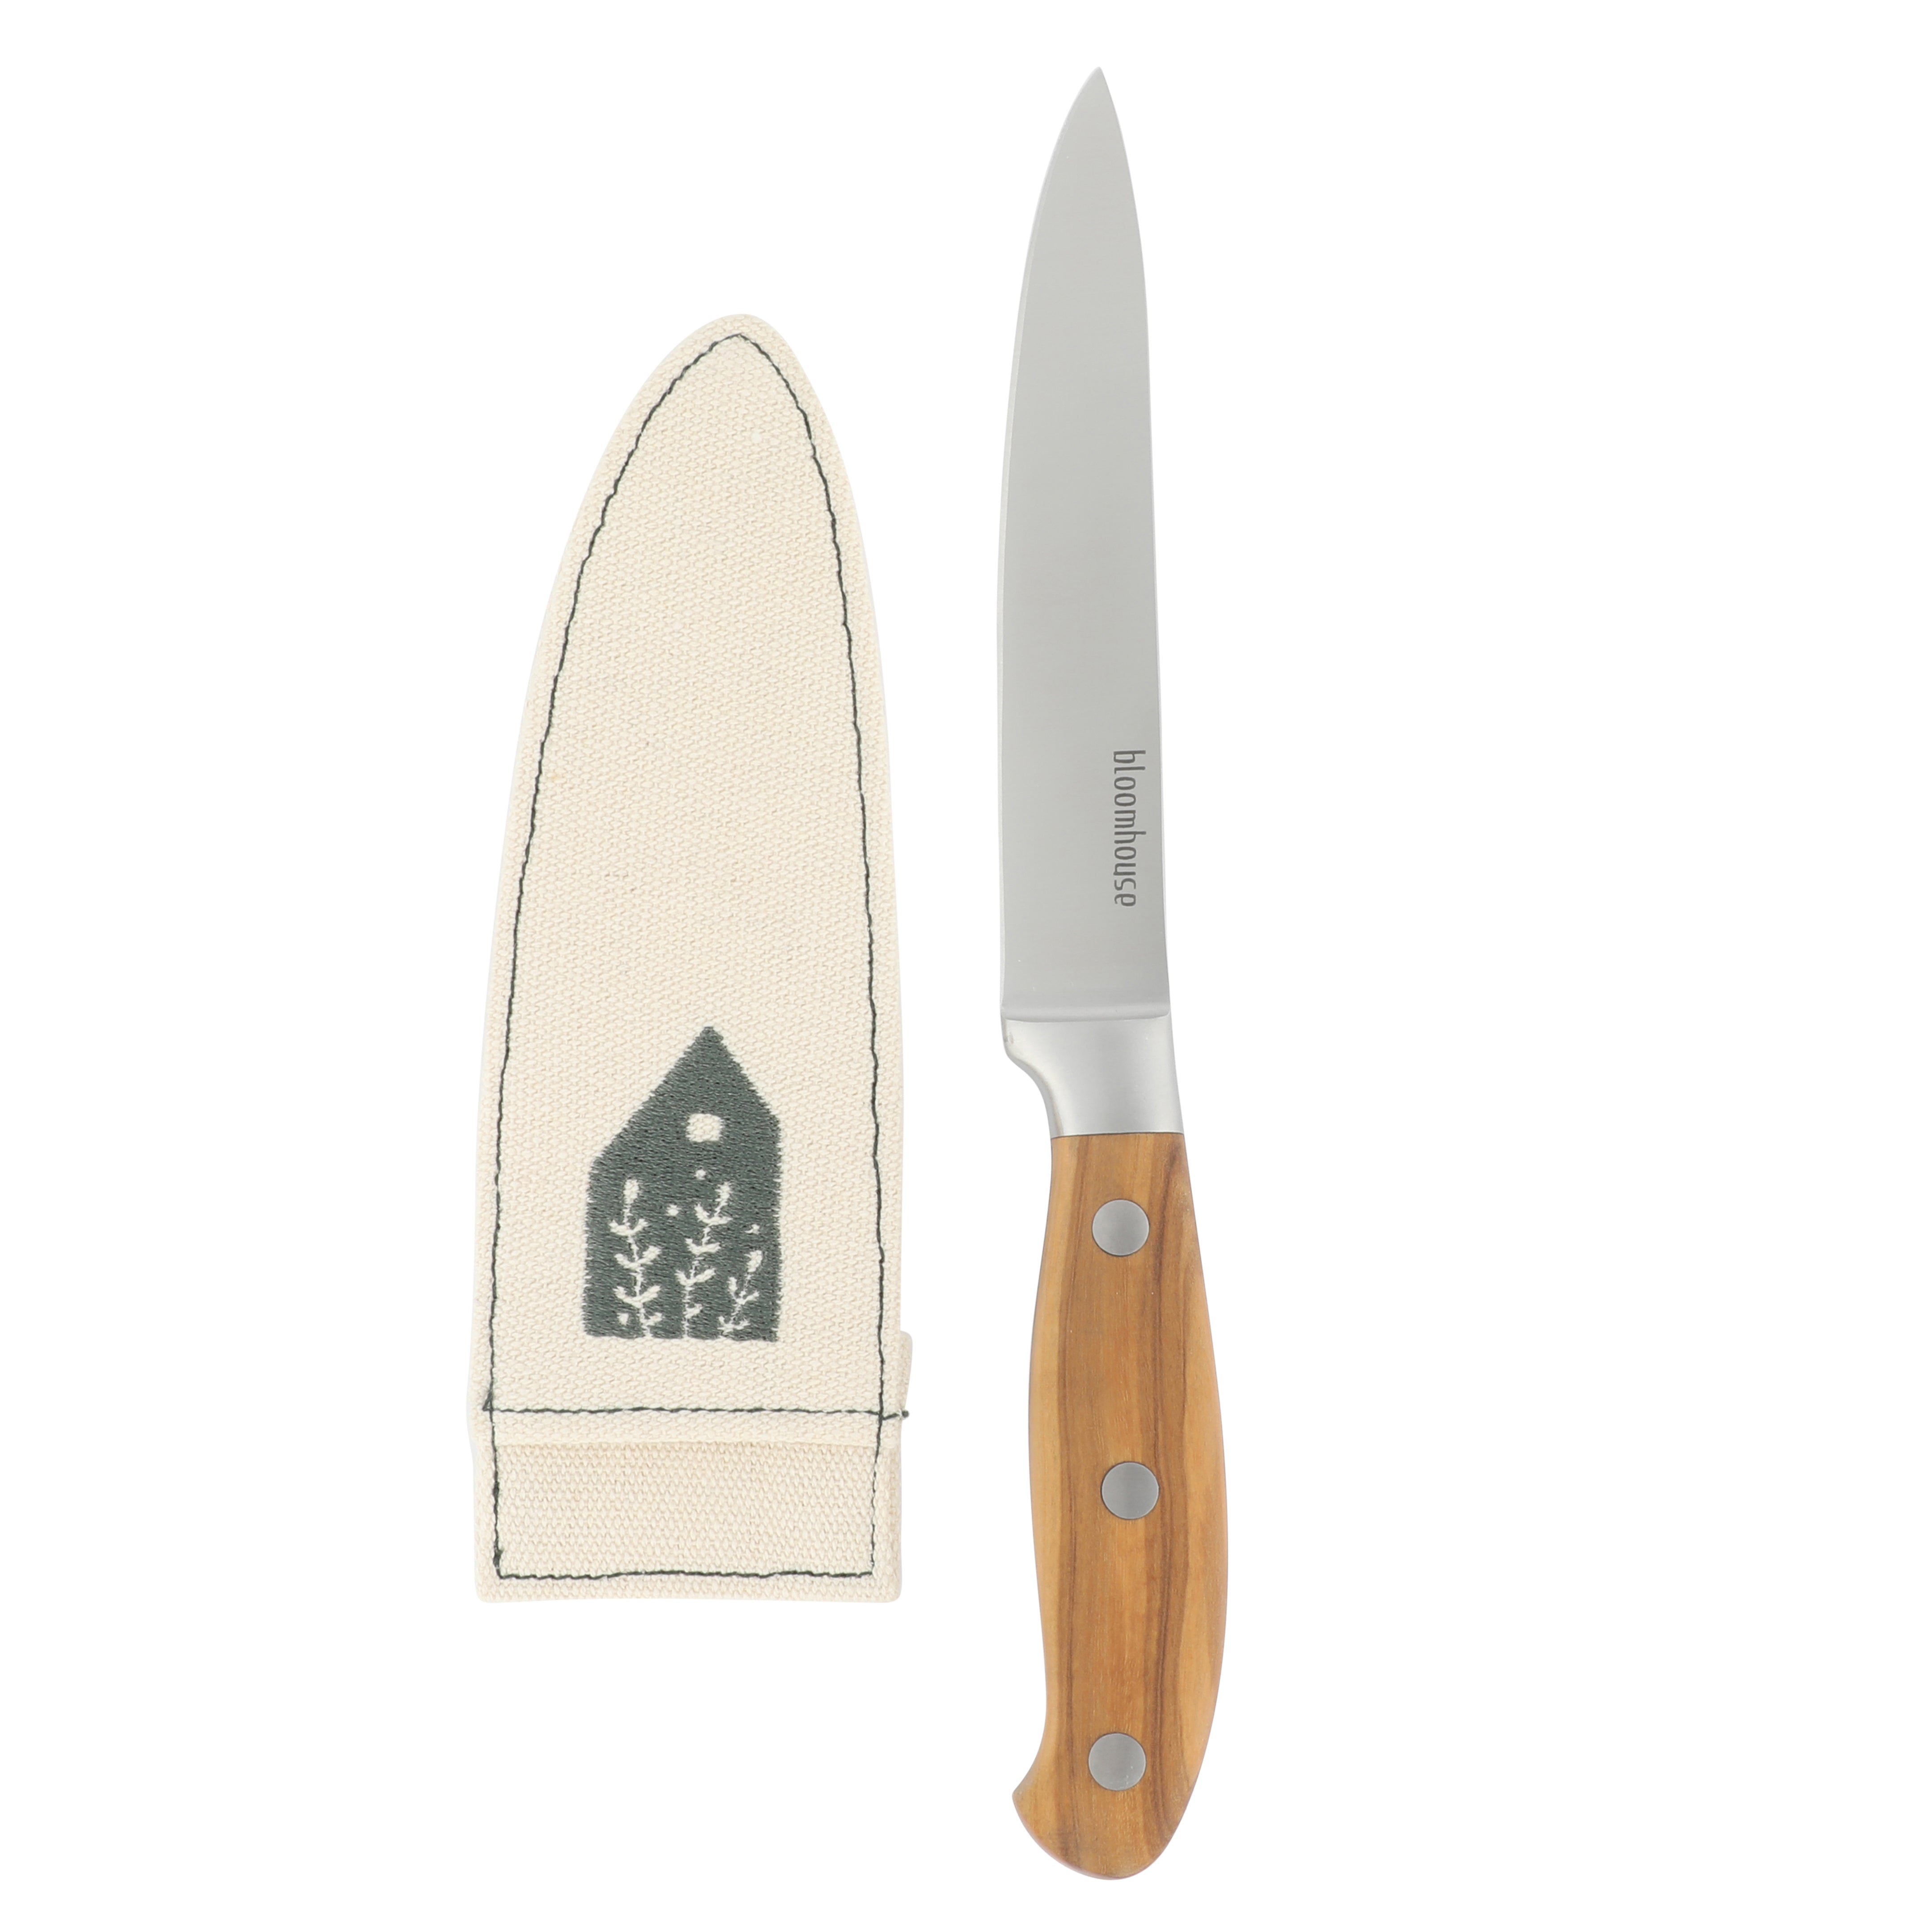 Bloomhouse 5 Inch German Steel Utility Boning Knife w/ Olive Wood Forged Handle